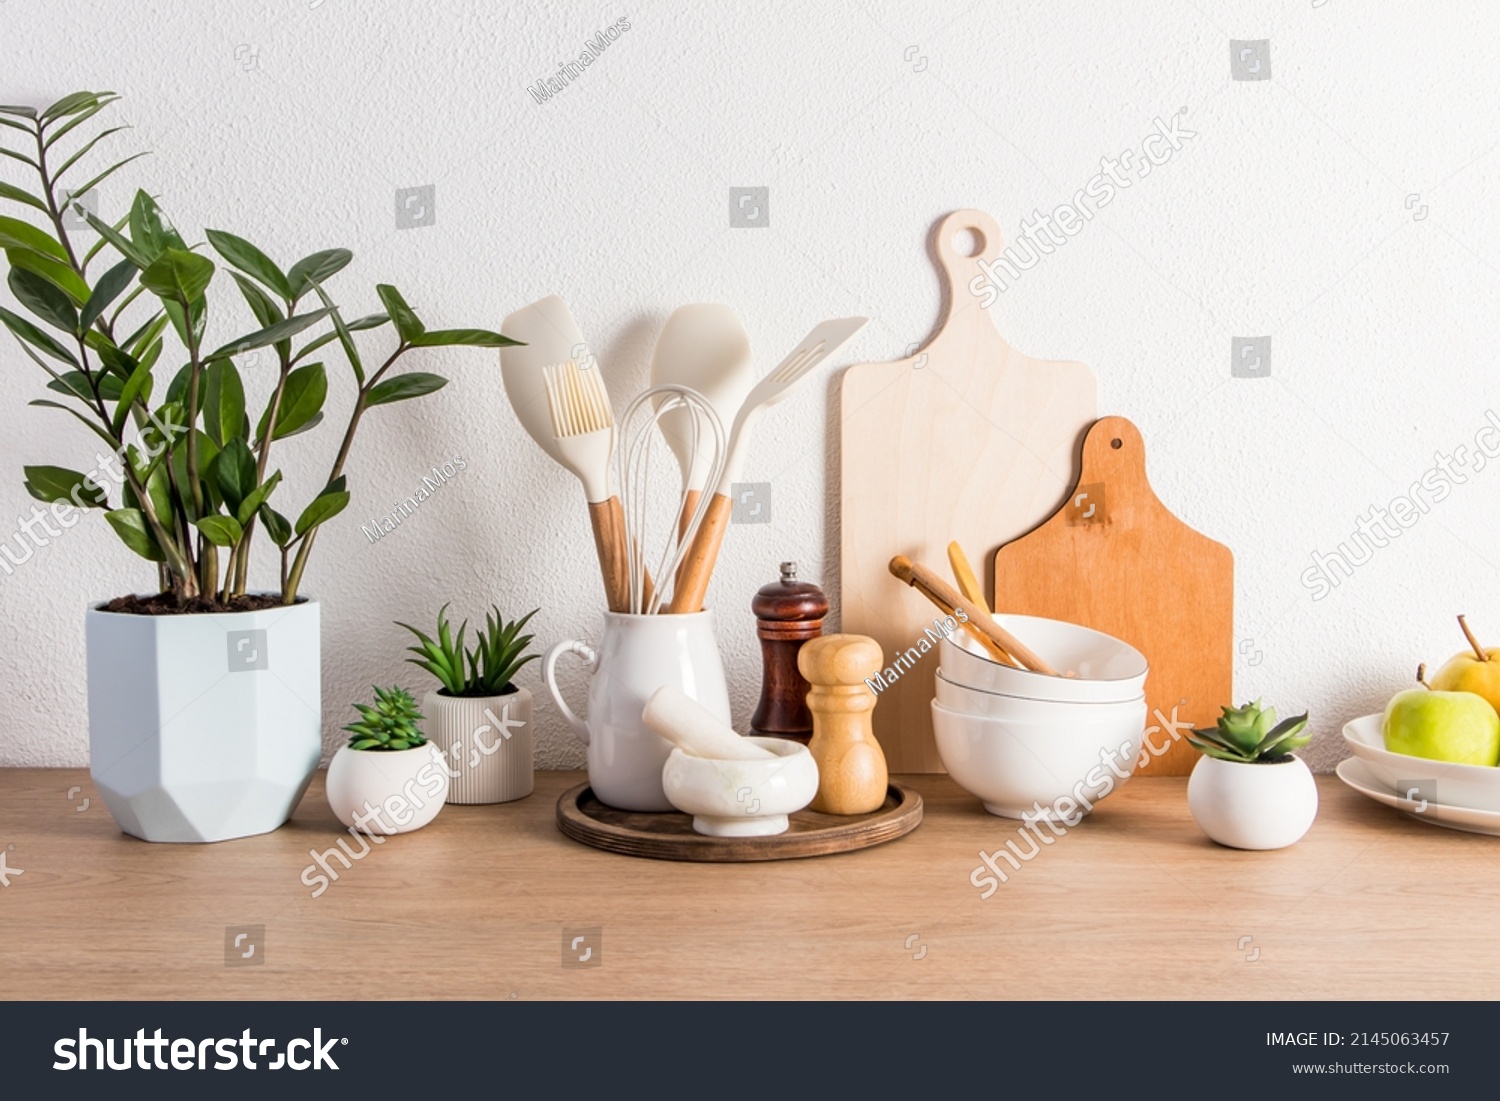 a variety of kitchen utensils, utensils, a potted flower and fruit on a plate on a wooden countertop against a white textured wall. front view #2145063457